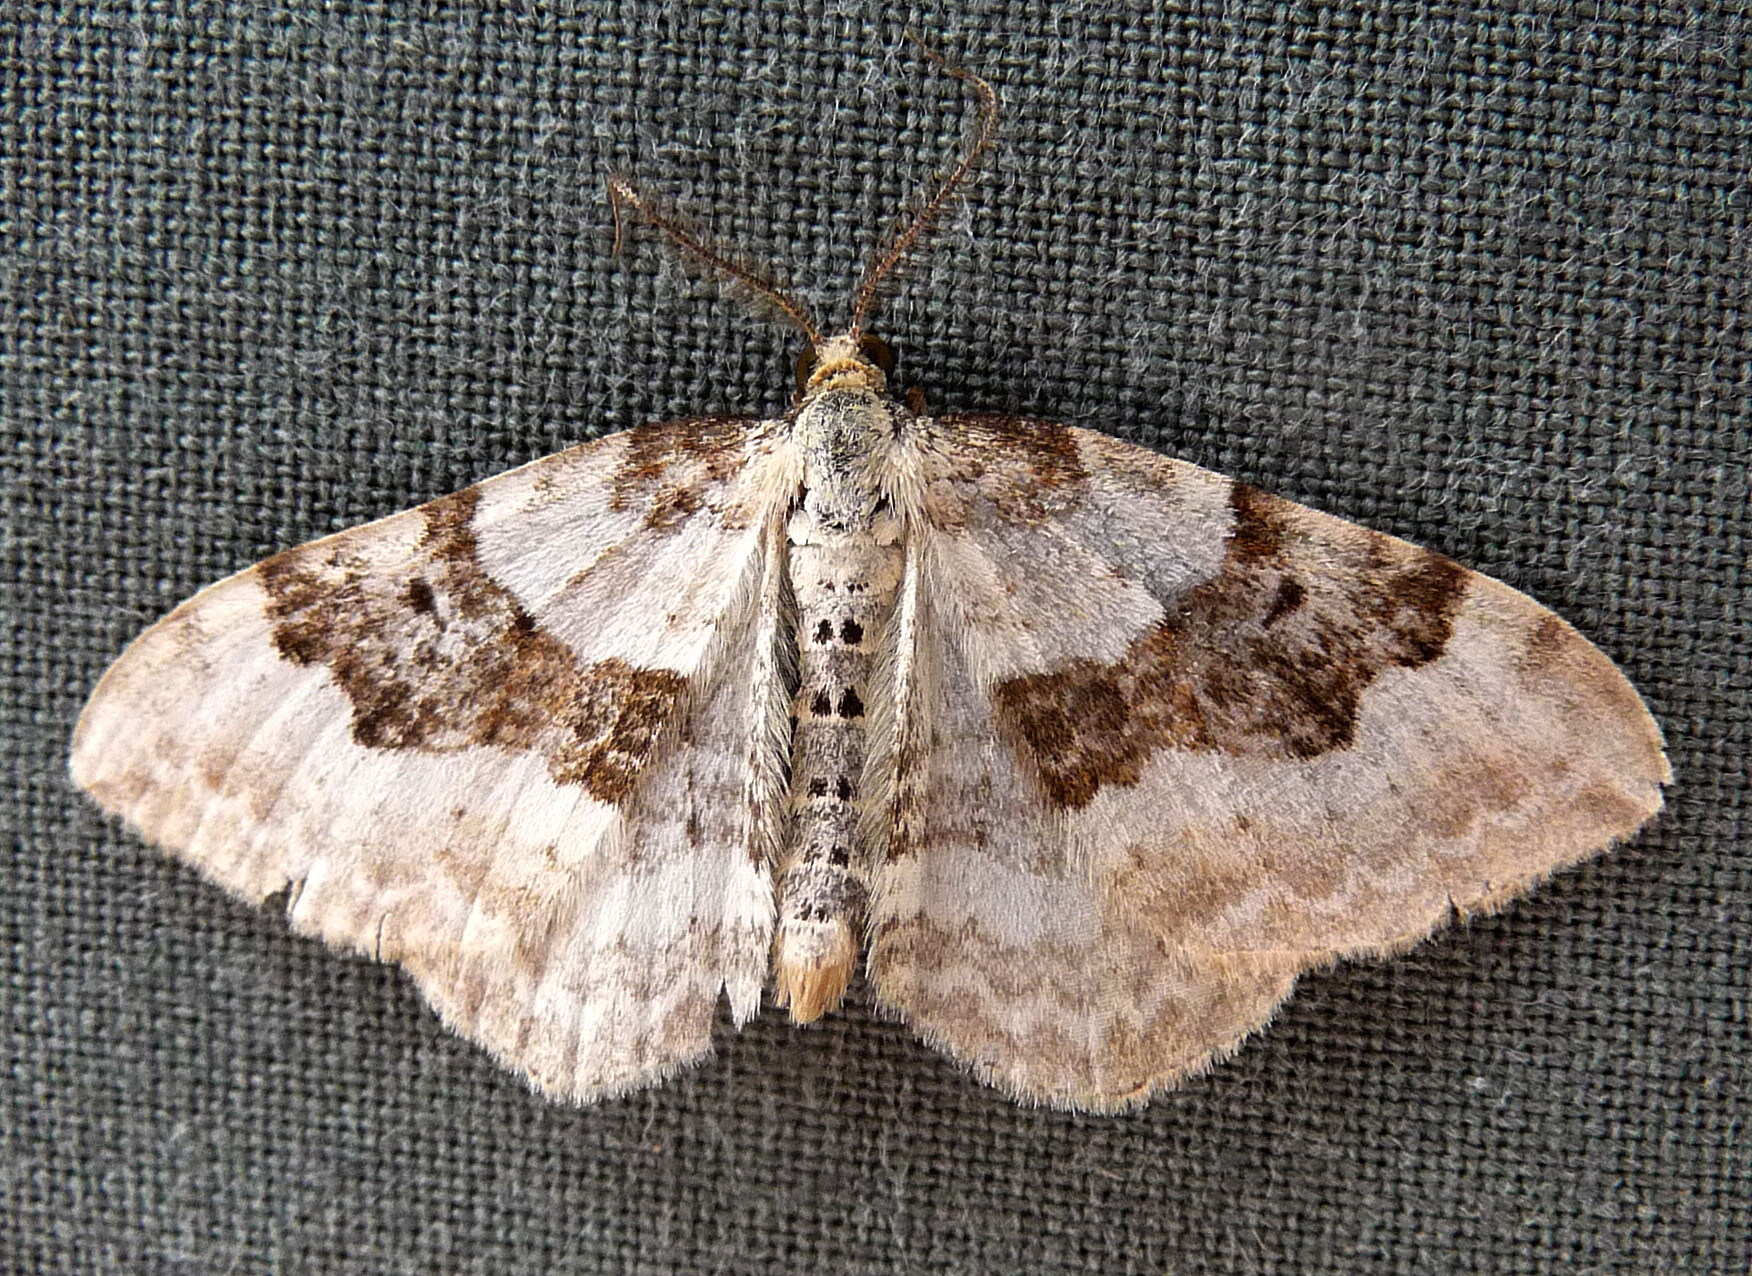 large moth with brown spots on it's wings sitting on fabric